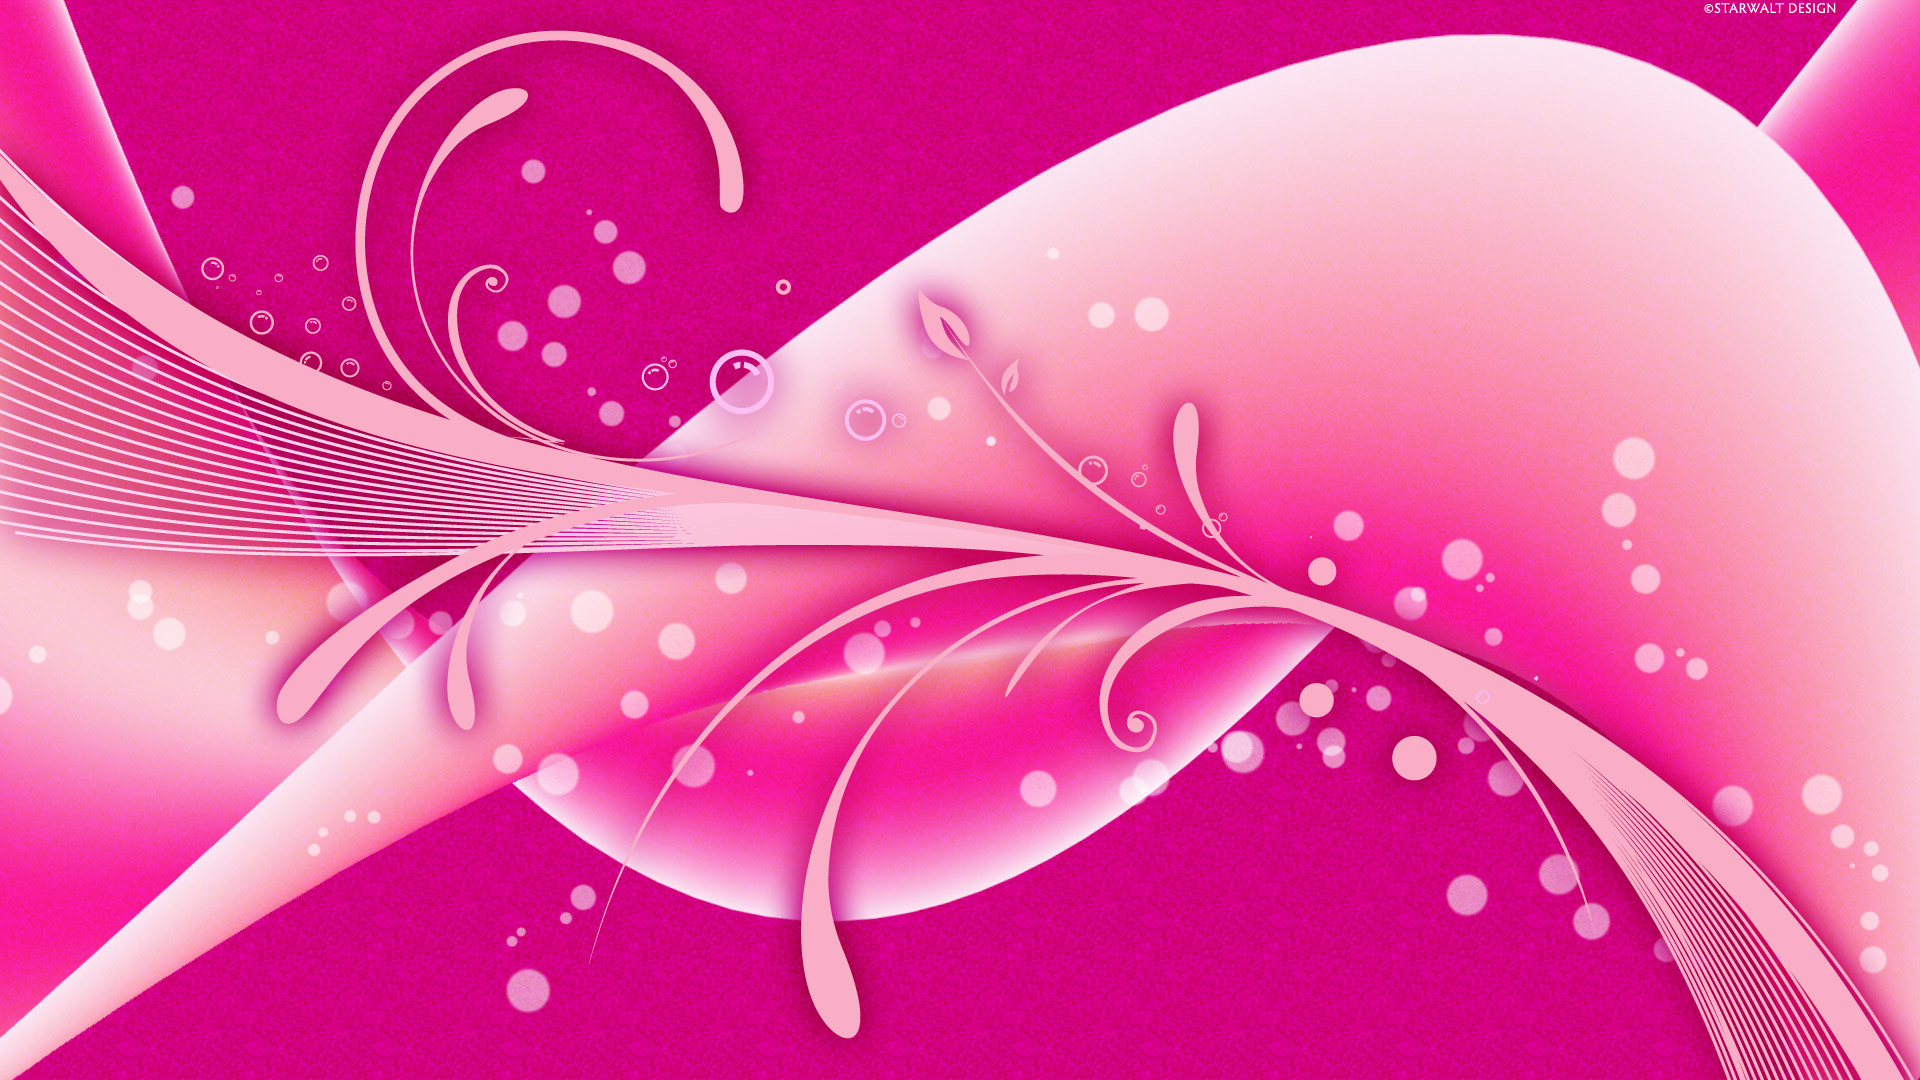 Pink And Black Wallpaper Designs 5 High Resolution Wallpaper. Pink And  Black Wallpaper Designs 5 High Resolution Wallpaper